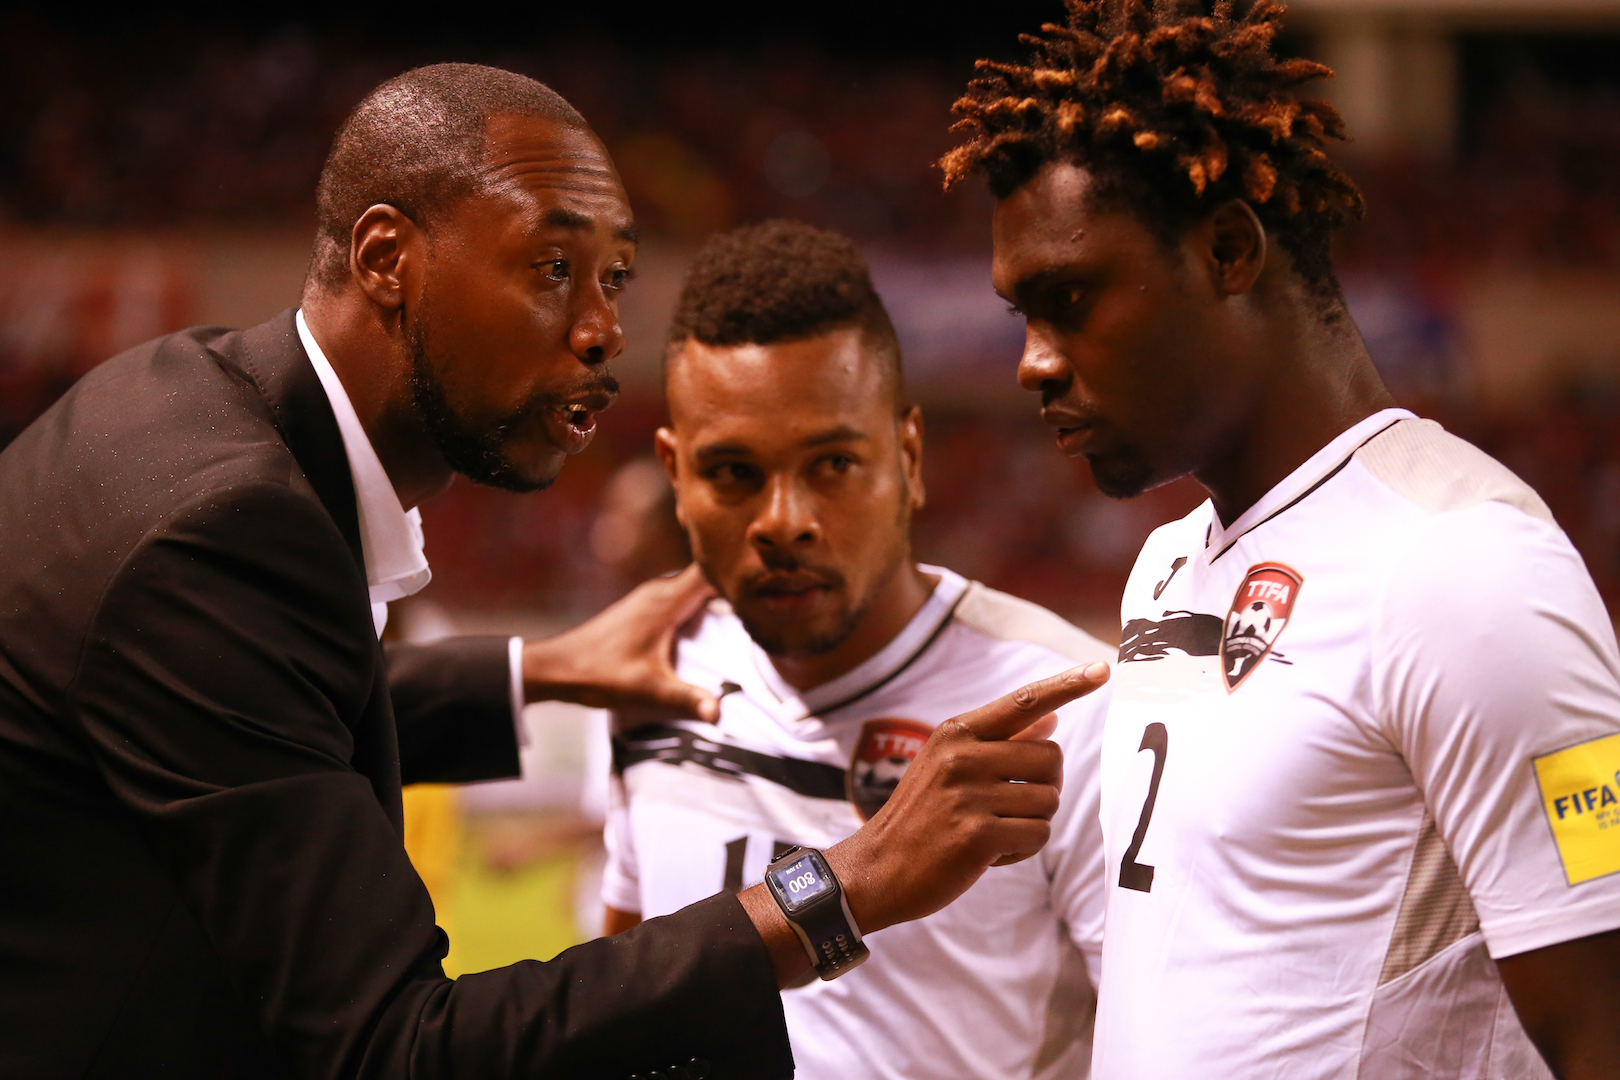 Headcoach Dennis Lawrence gives final instructions to defenders Aubery David (#2) and Curtis Gonzales ahead of the start of the FIFA Russia 2018 World Cup Qualifier match vs Costa Rica. Photo by Allan Crane (For editorial use, please contact Allan Crane)